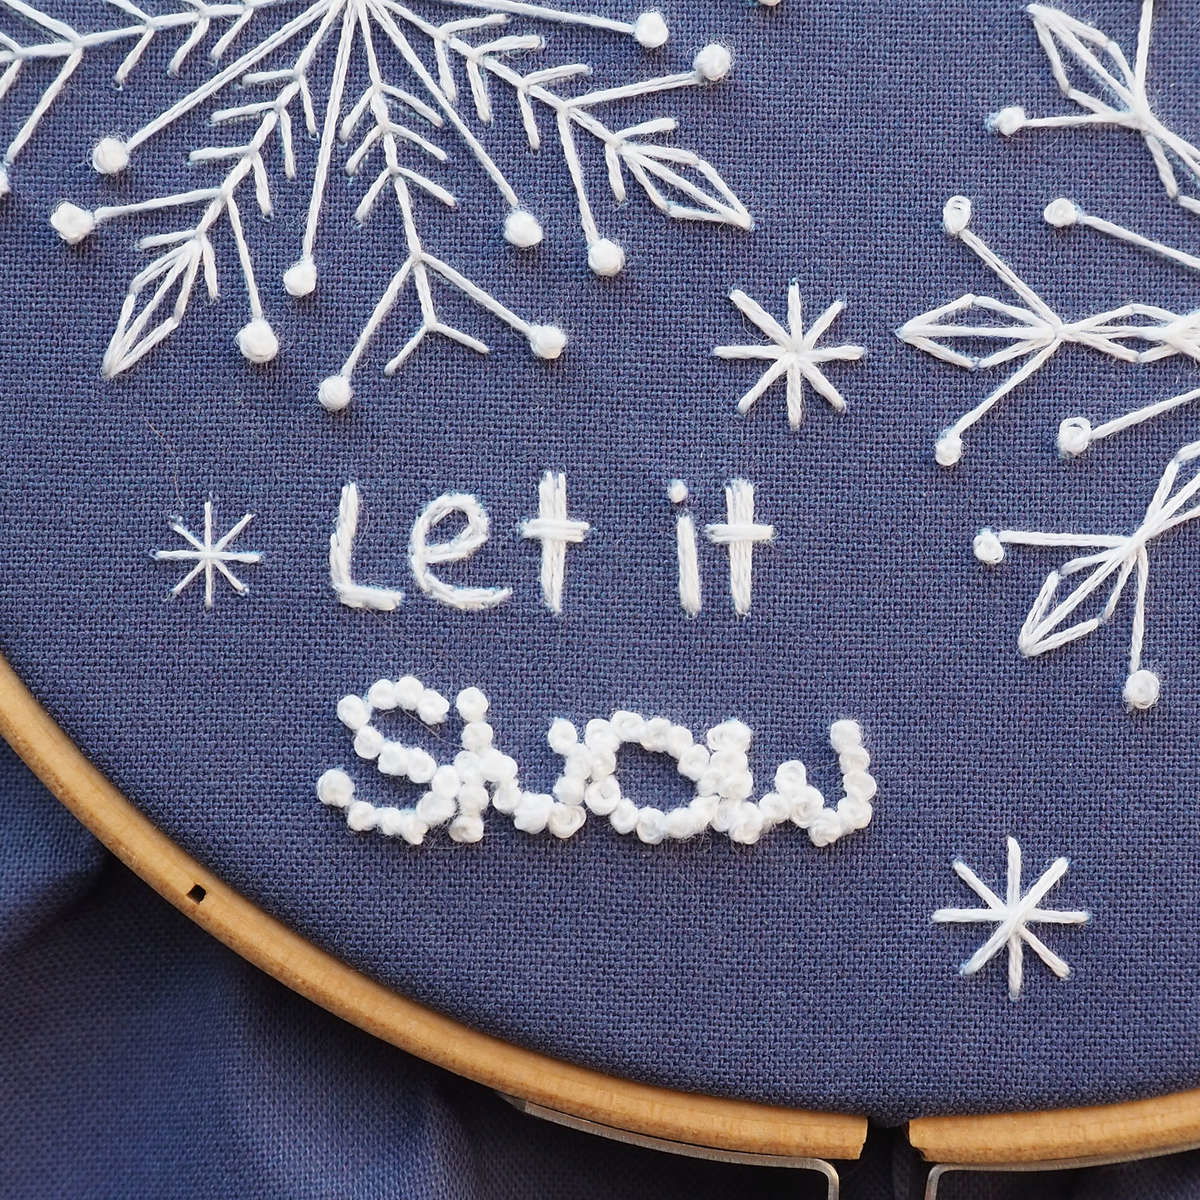 Let it snow in french knots to look like snowballs